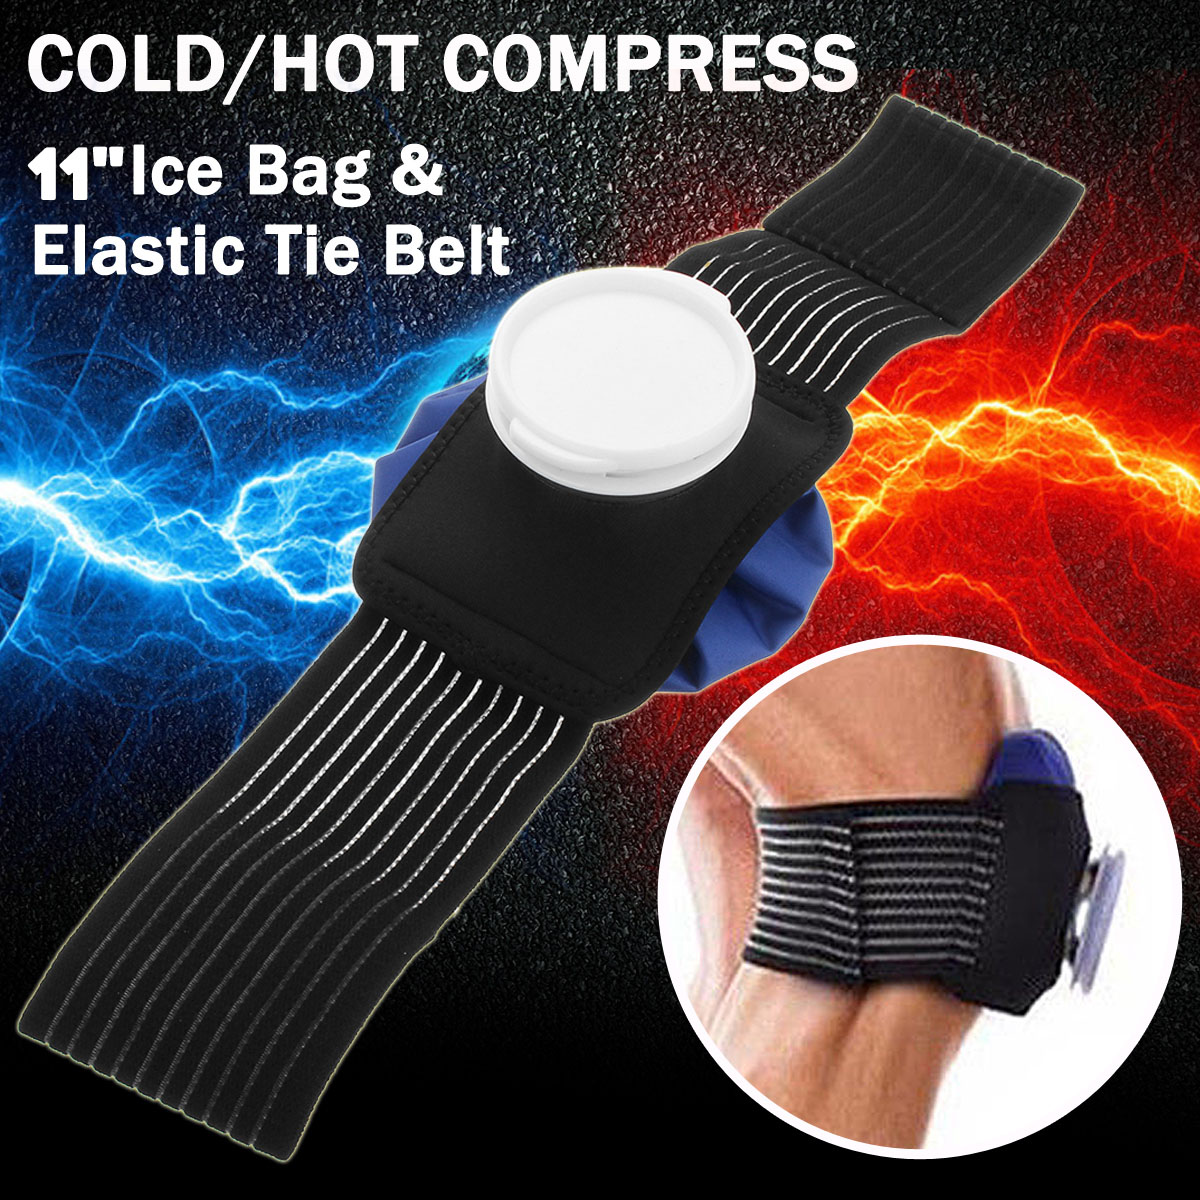 Ice-Bag-Pack-Pain-Relief-Cold-Broad-Knee-Shoulder-Injuries-Therapy-Strap-Wrap-Elastic-Tie-Belt-1551776-5